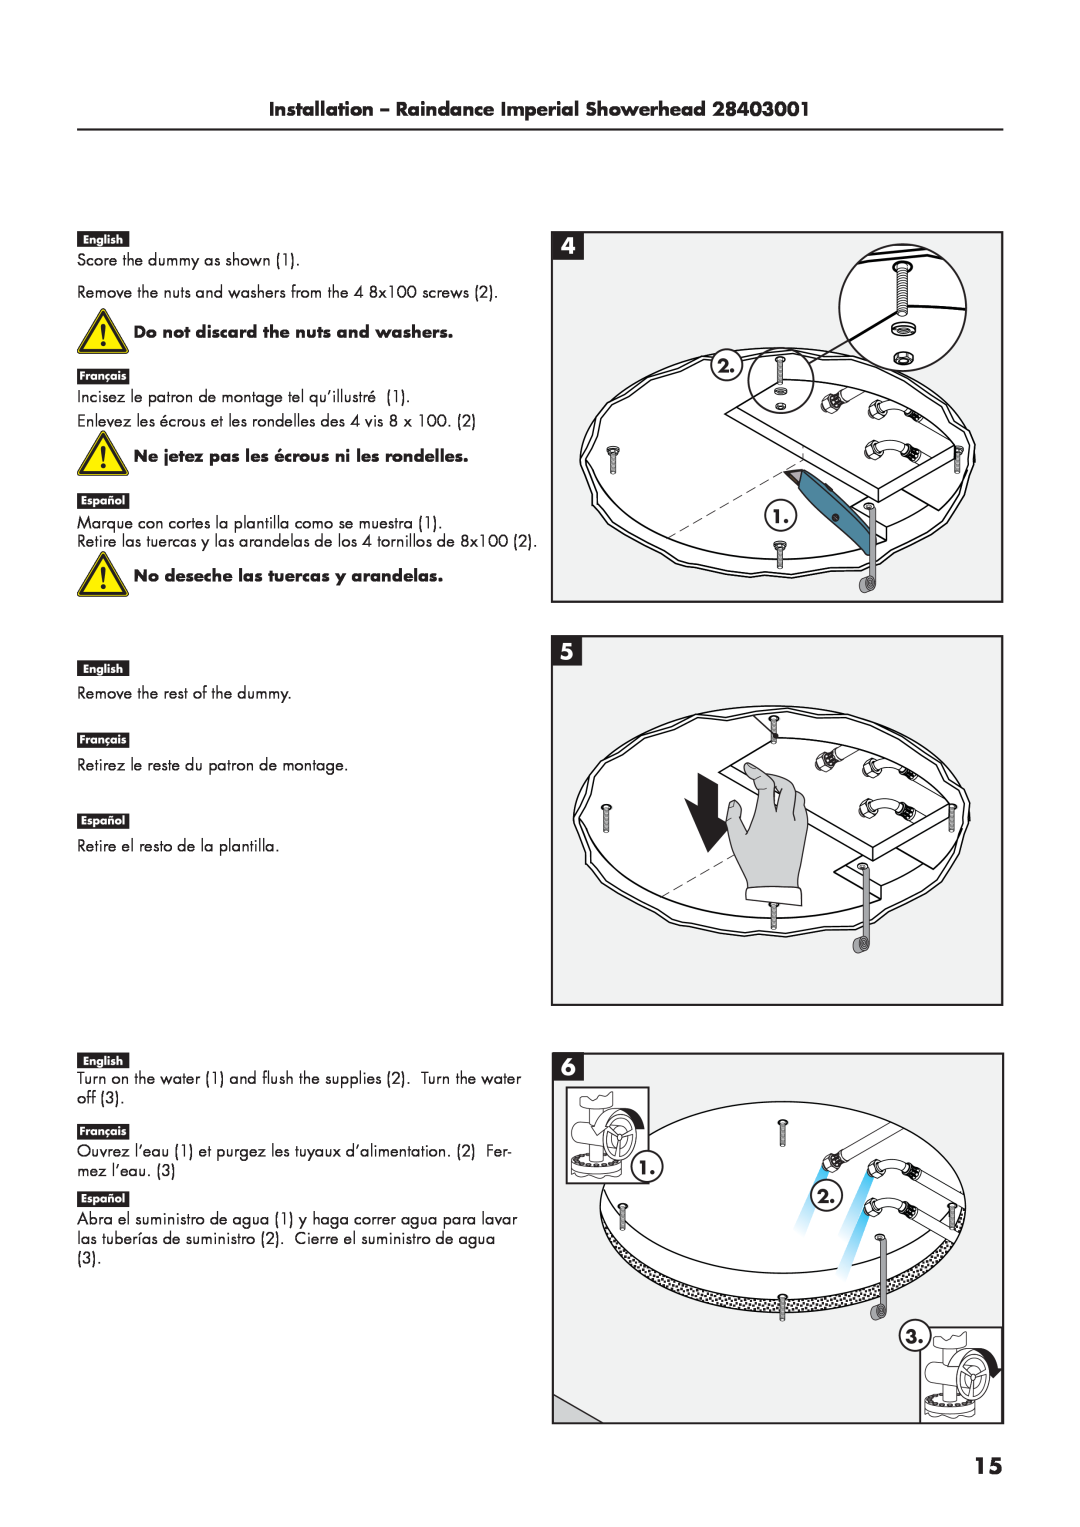 Axor 28412181, 28403001 Installation - Raindance Imperial Showerhead, Do not discard the nuts and washers 